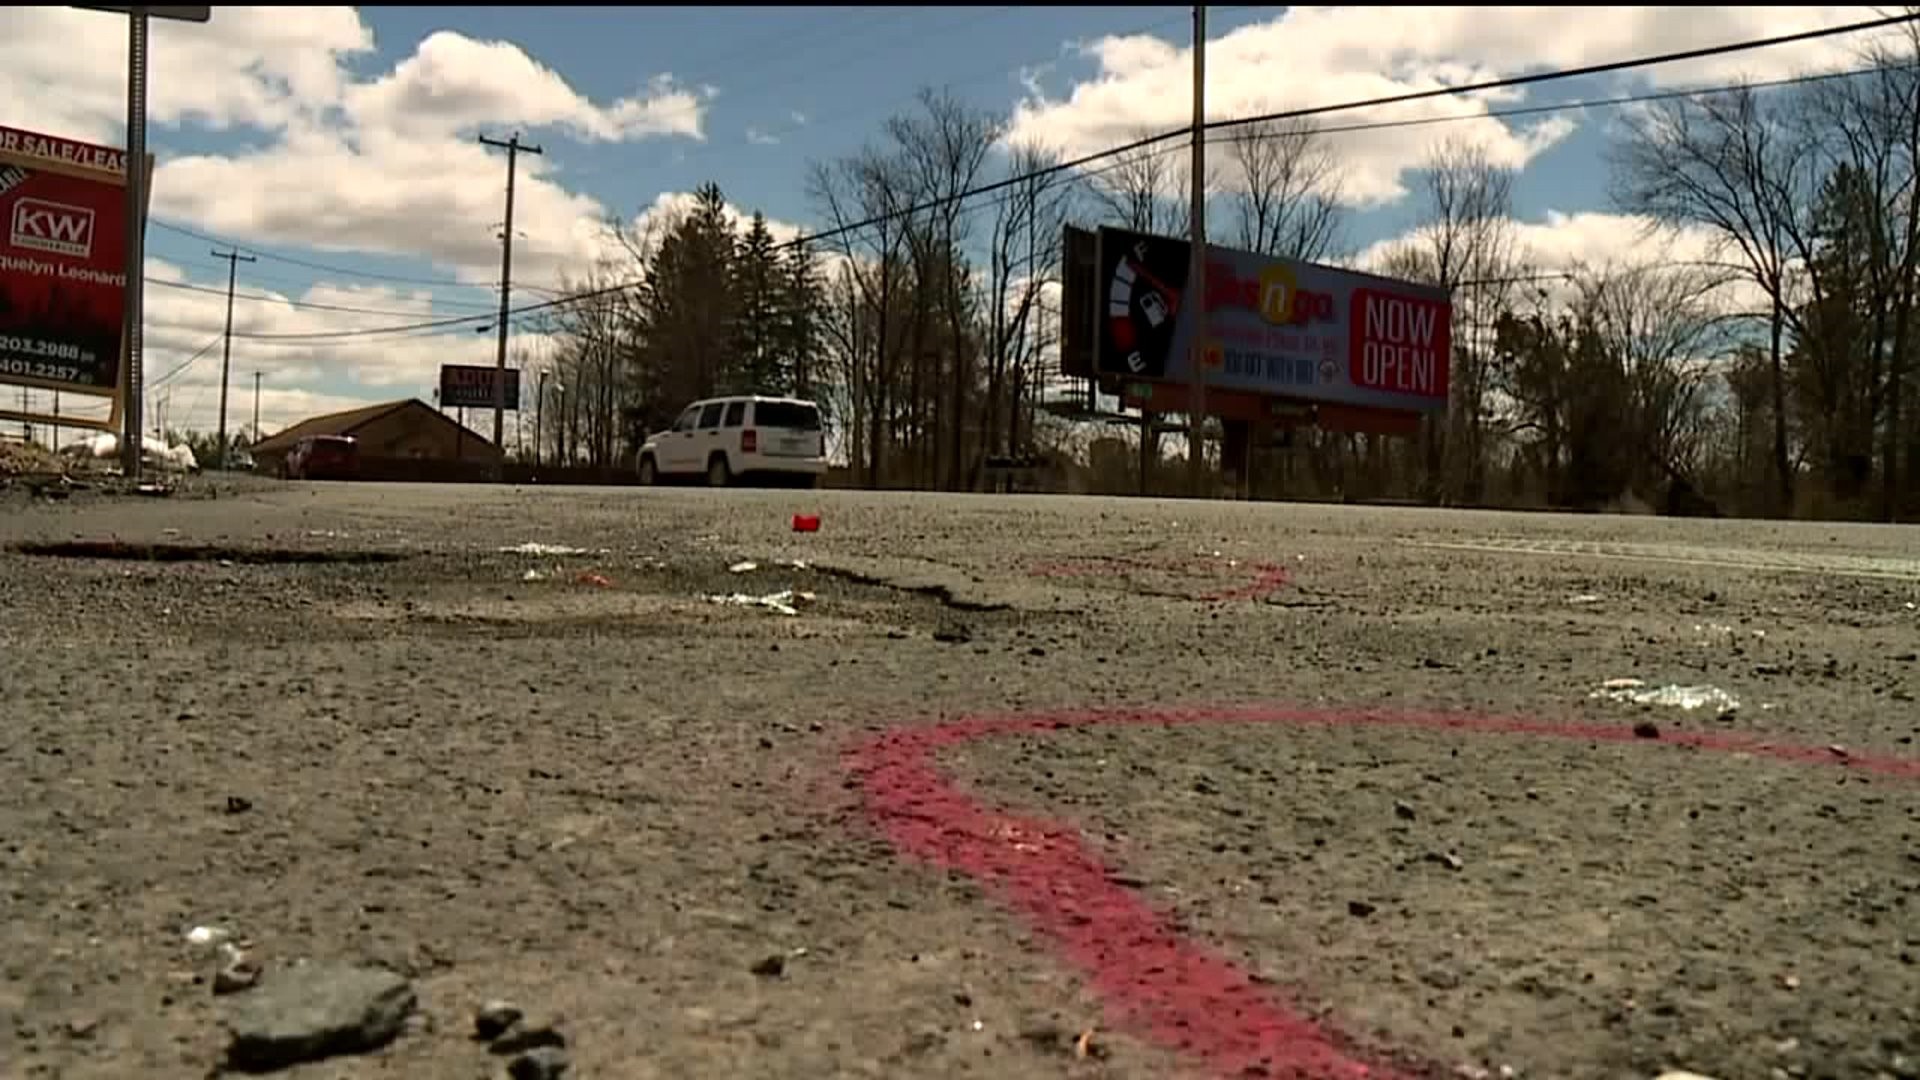 Driver Arrested for Deadly Hit-and-Run in Monroe County